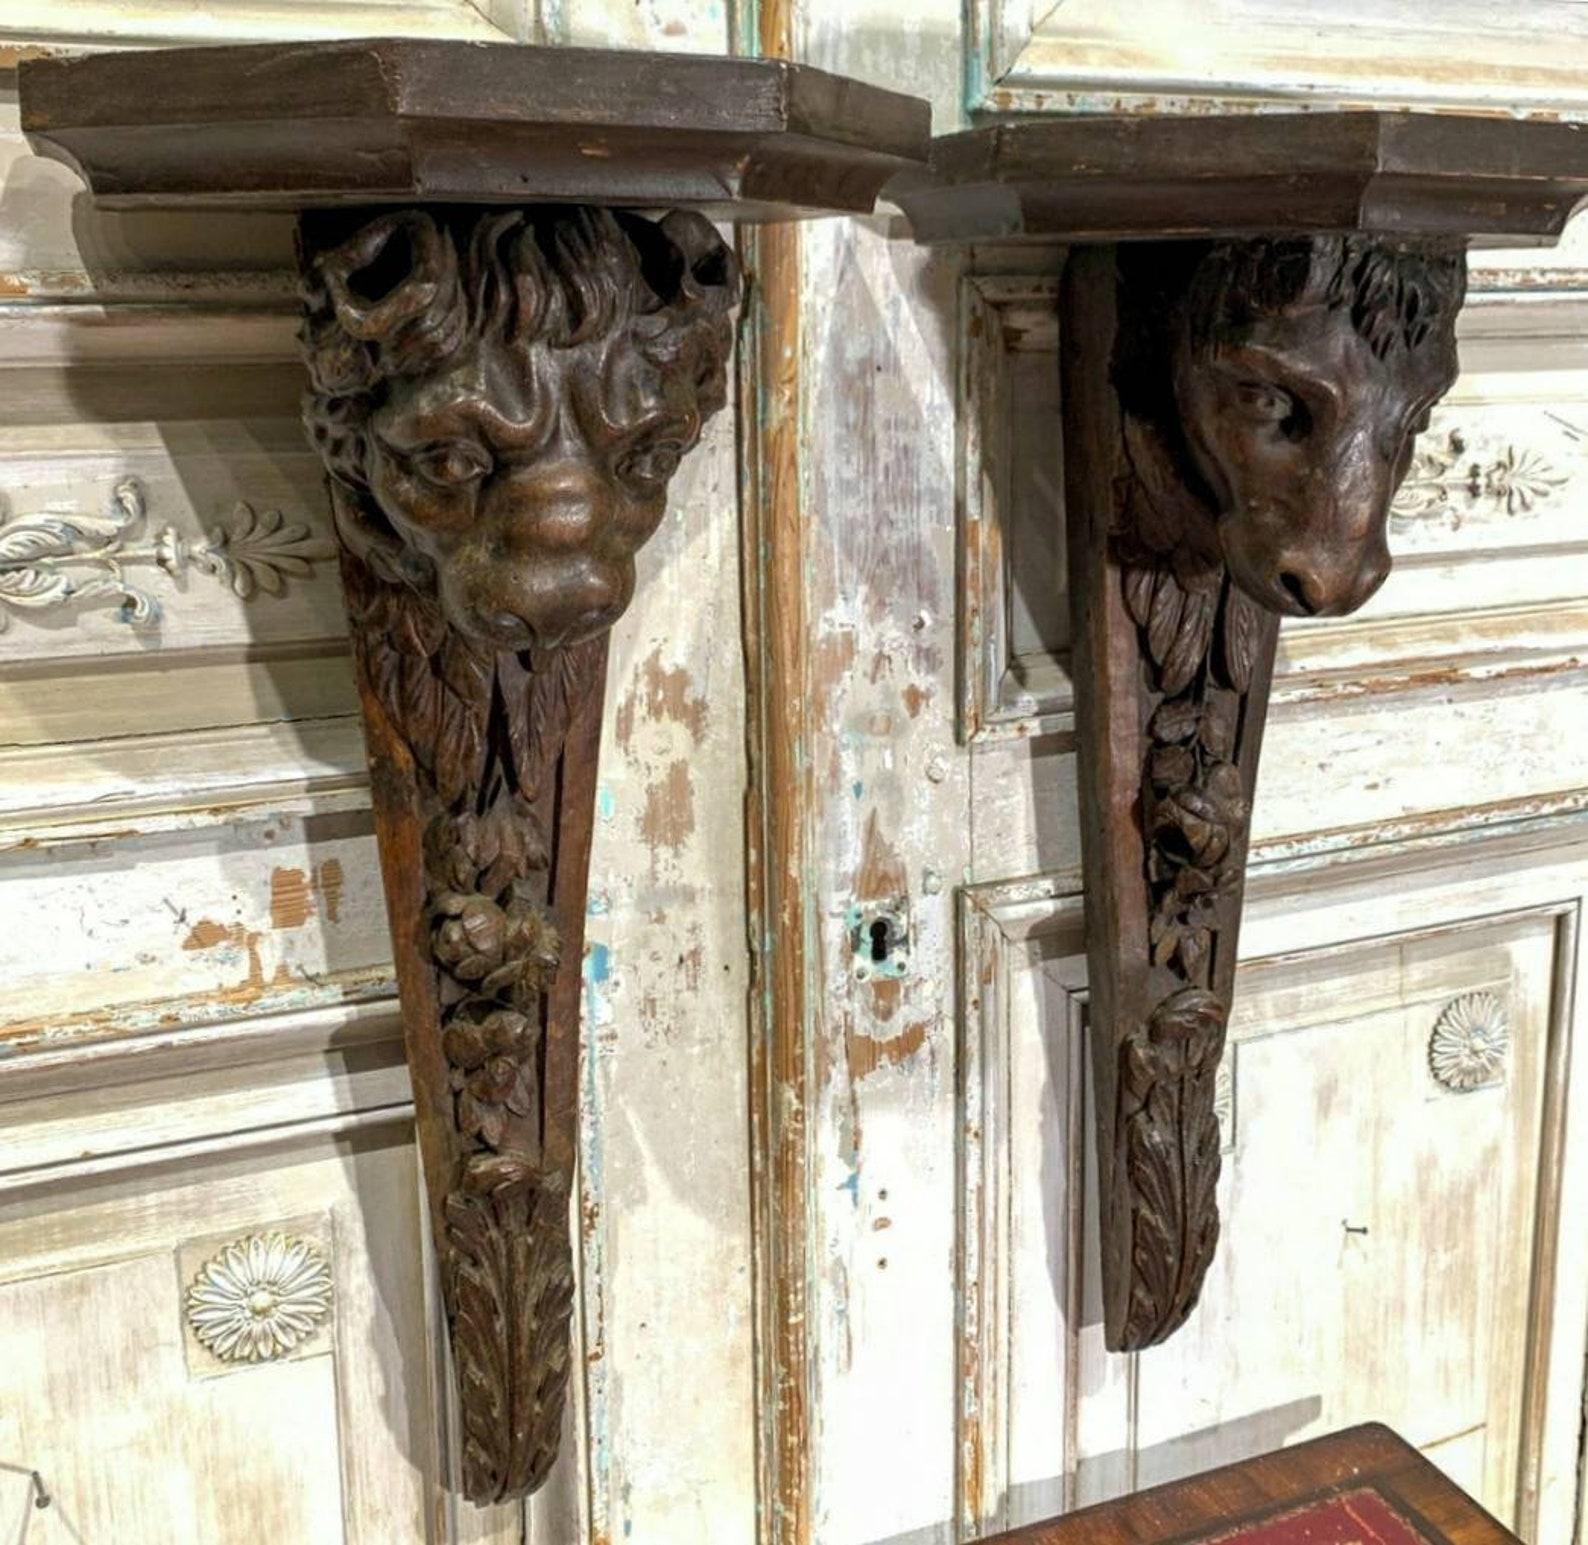 A pair of French architectural salvaged corbels, dating to the 18th to early 19th century. The large, elaborately hand carved and sculpted wooden building elements feature finely detailed figural bull and lion head over trailing fiolate motif